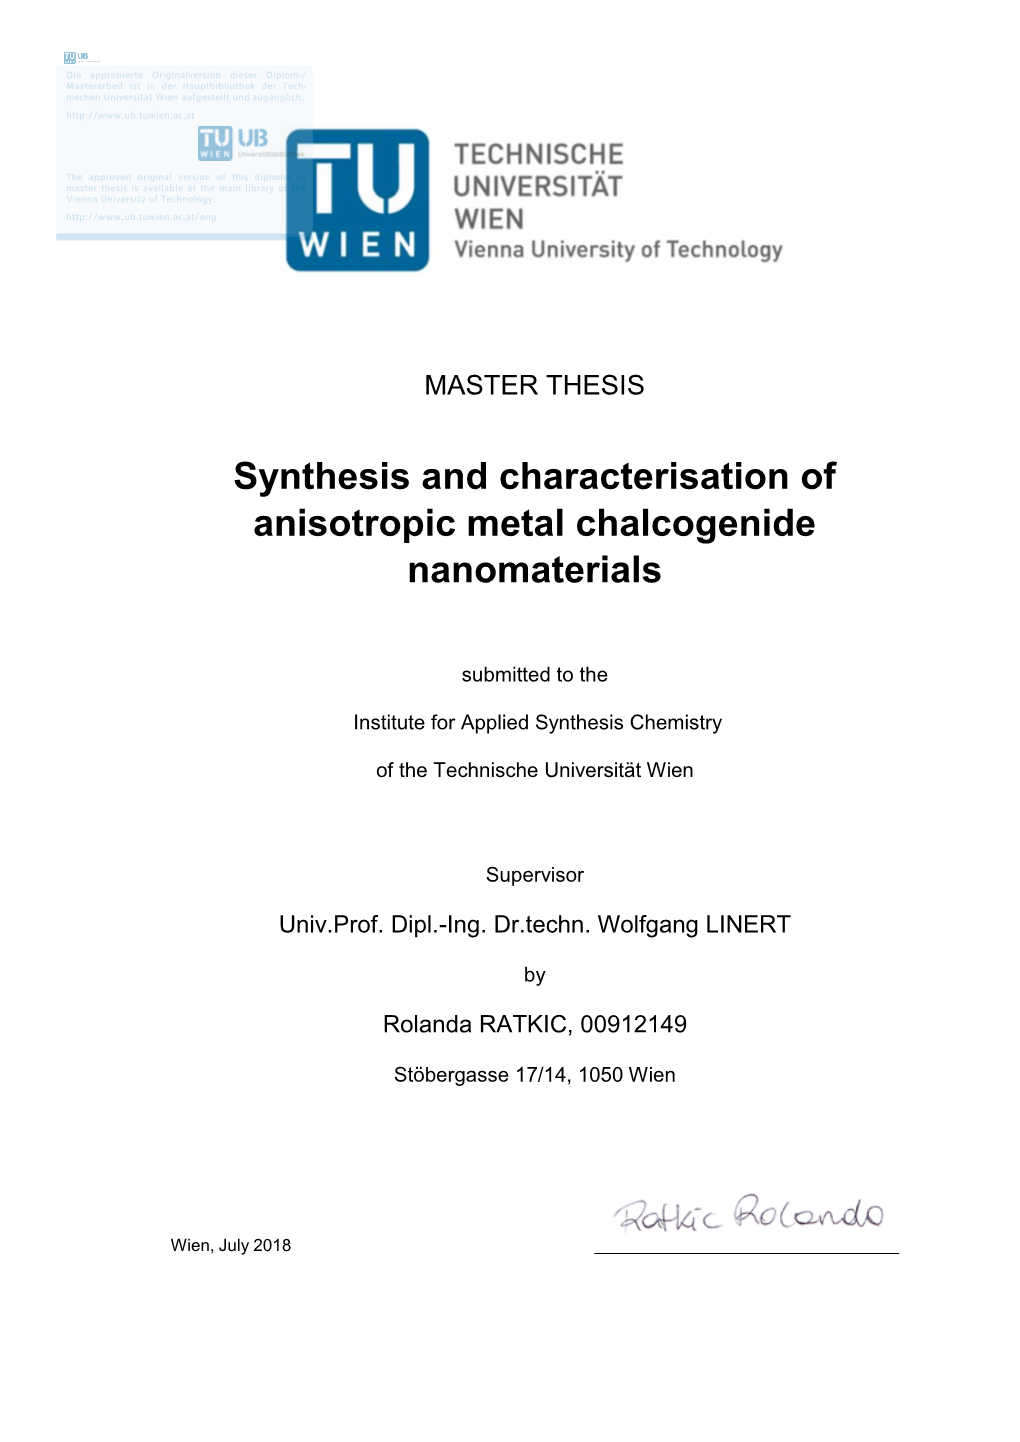 Synthesis and Characterisation of Anisotropic Metal Chalcogenide Nanomaterials